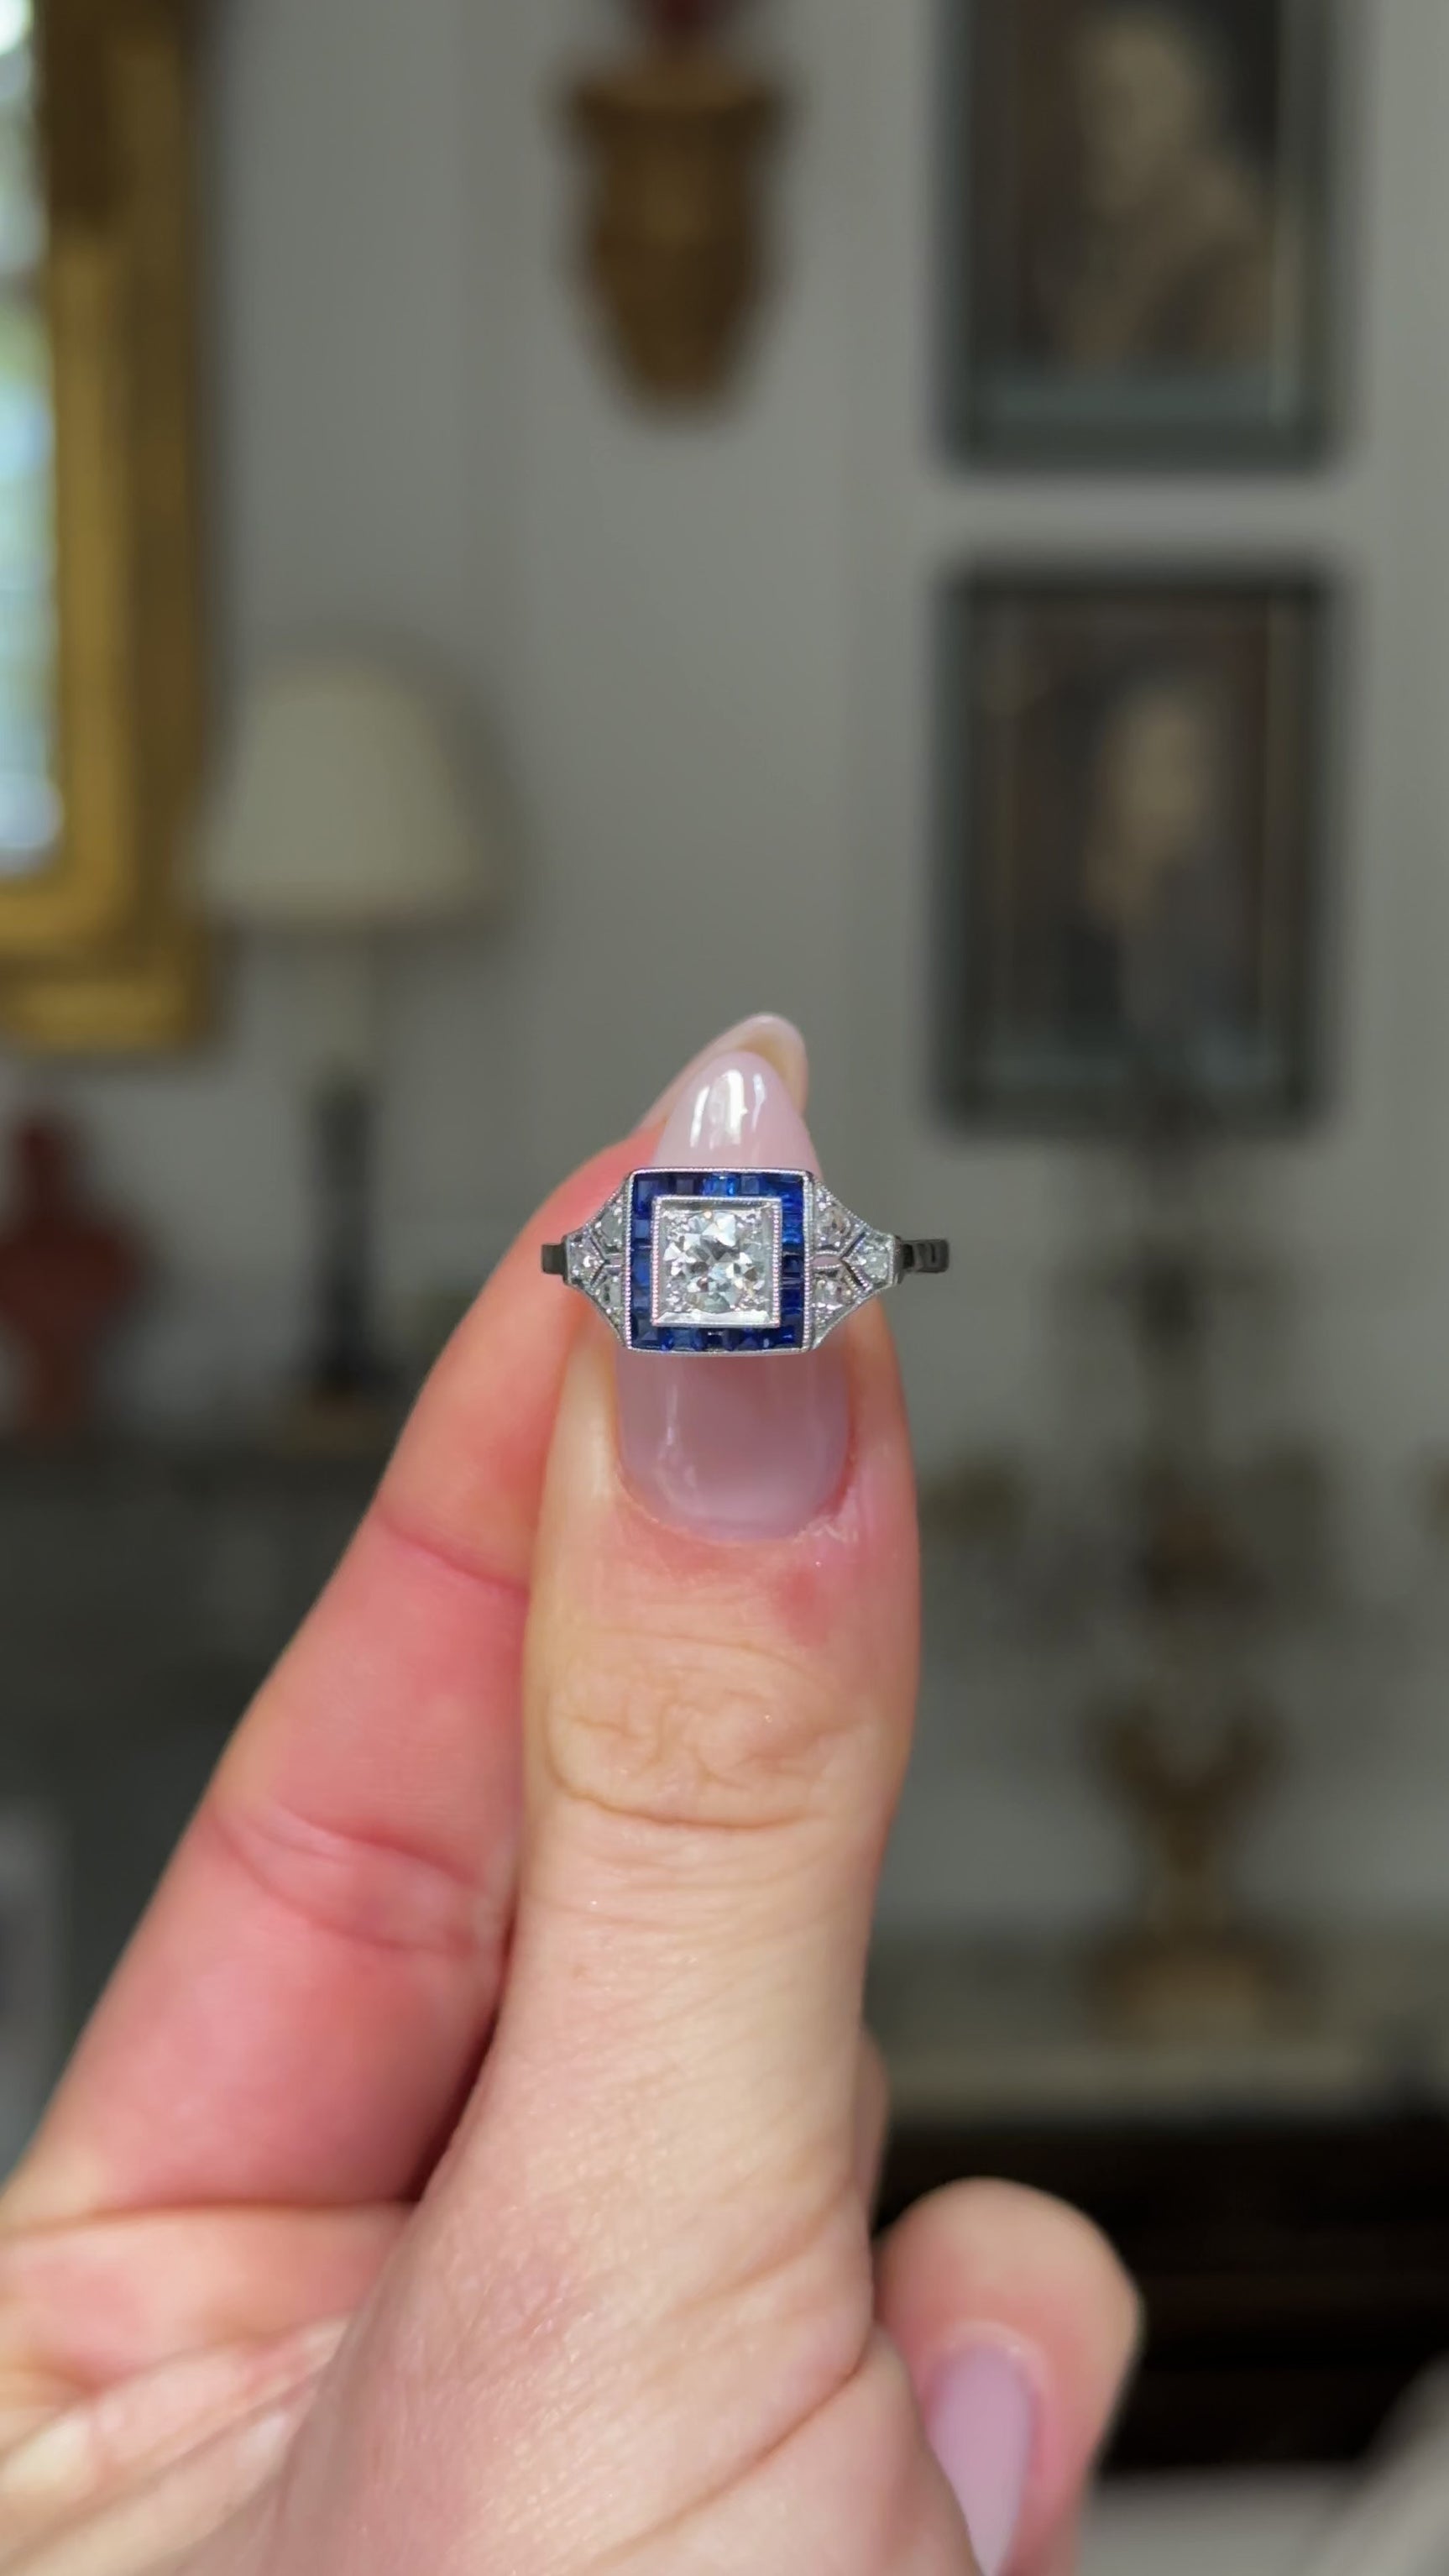 Vintage sapphire and diamond engagement ring, held in fingers and moved around to give perspective.